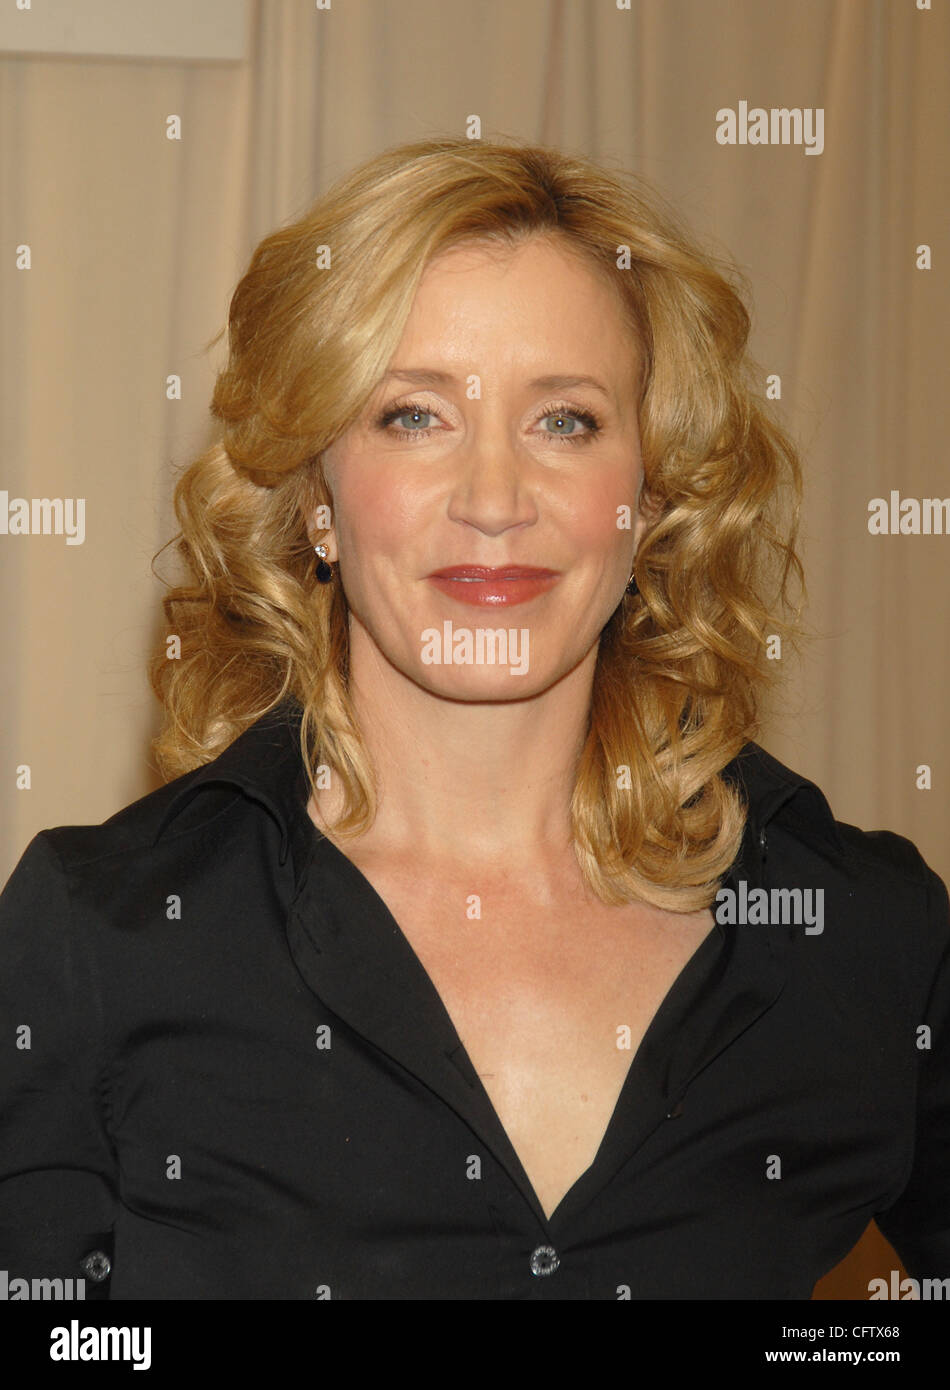 Jan 26, 2007; New York, NY, USA; FELICITY HUFFMAN signed her co-authored book'A Practicial Guide For The Boyfriend' at Barnes and Noble on 555 Fifth Avenue. Mandatory Credit: Photo by Dan Herrick/ZUMA KPA. (©) Copyright 2007 by Dan Herrick Stock Photo